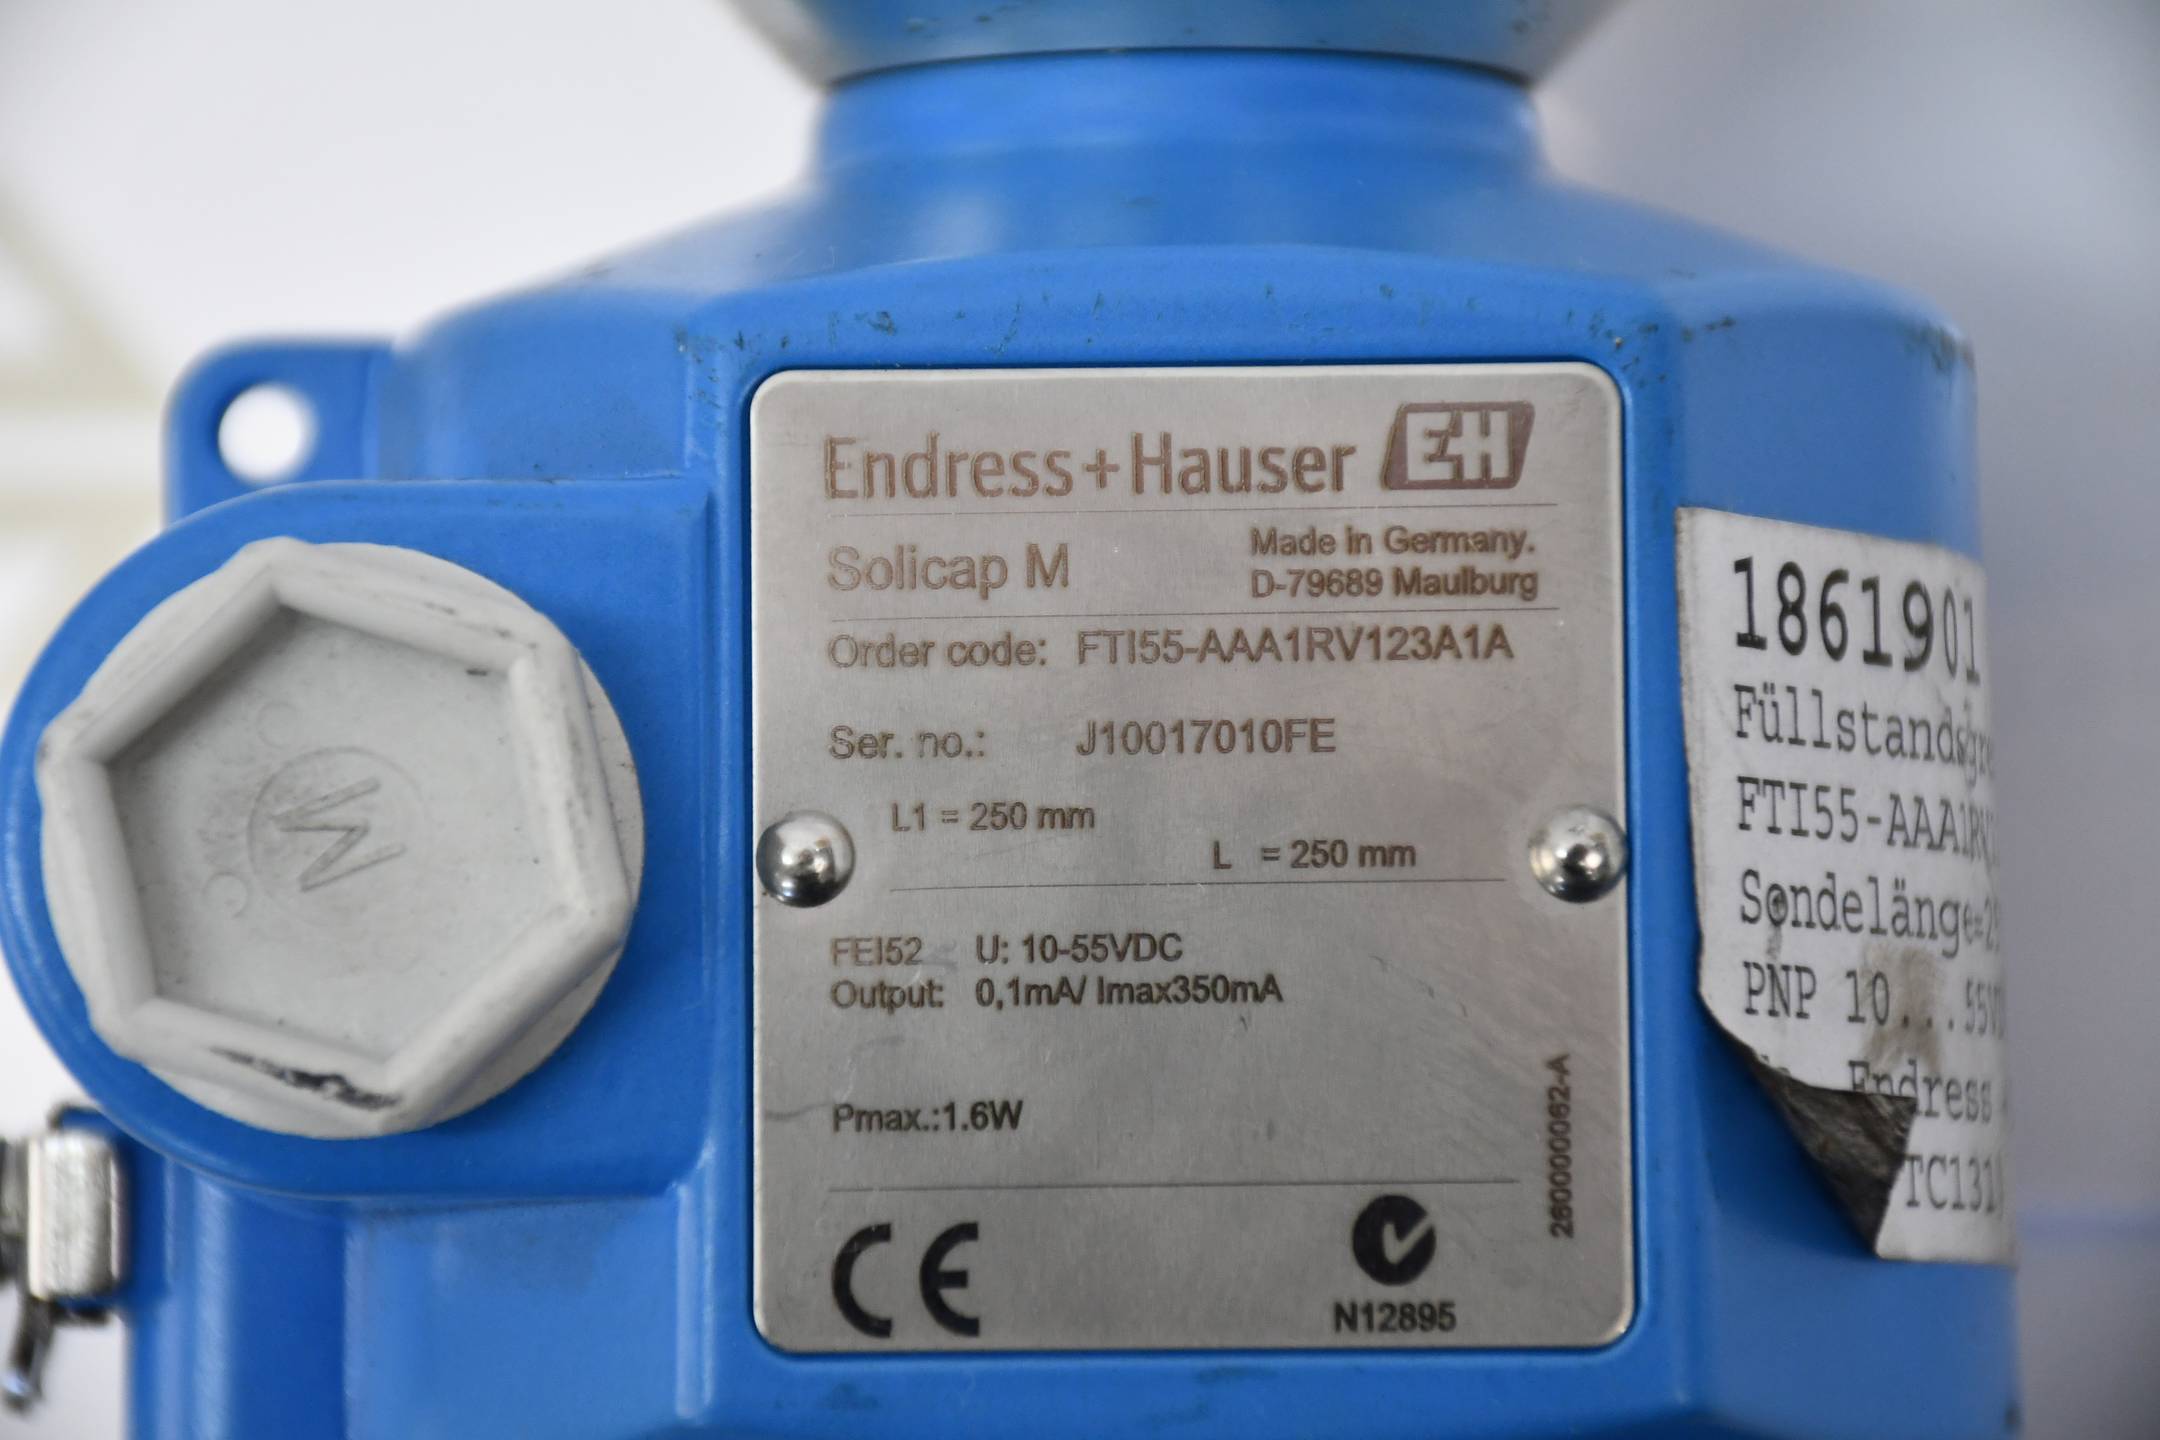 ENDRESS+HAUSER SOLICAP M FTI55-AAA1RV123A1A